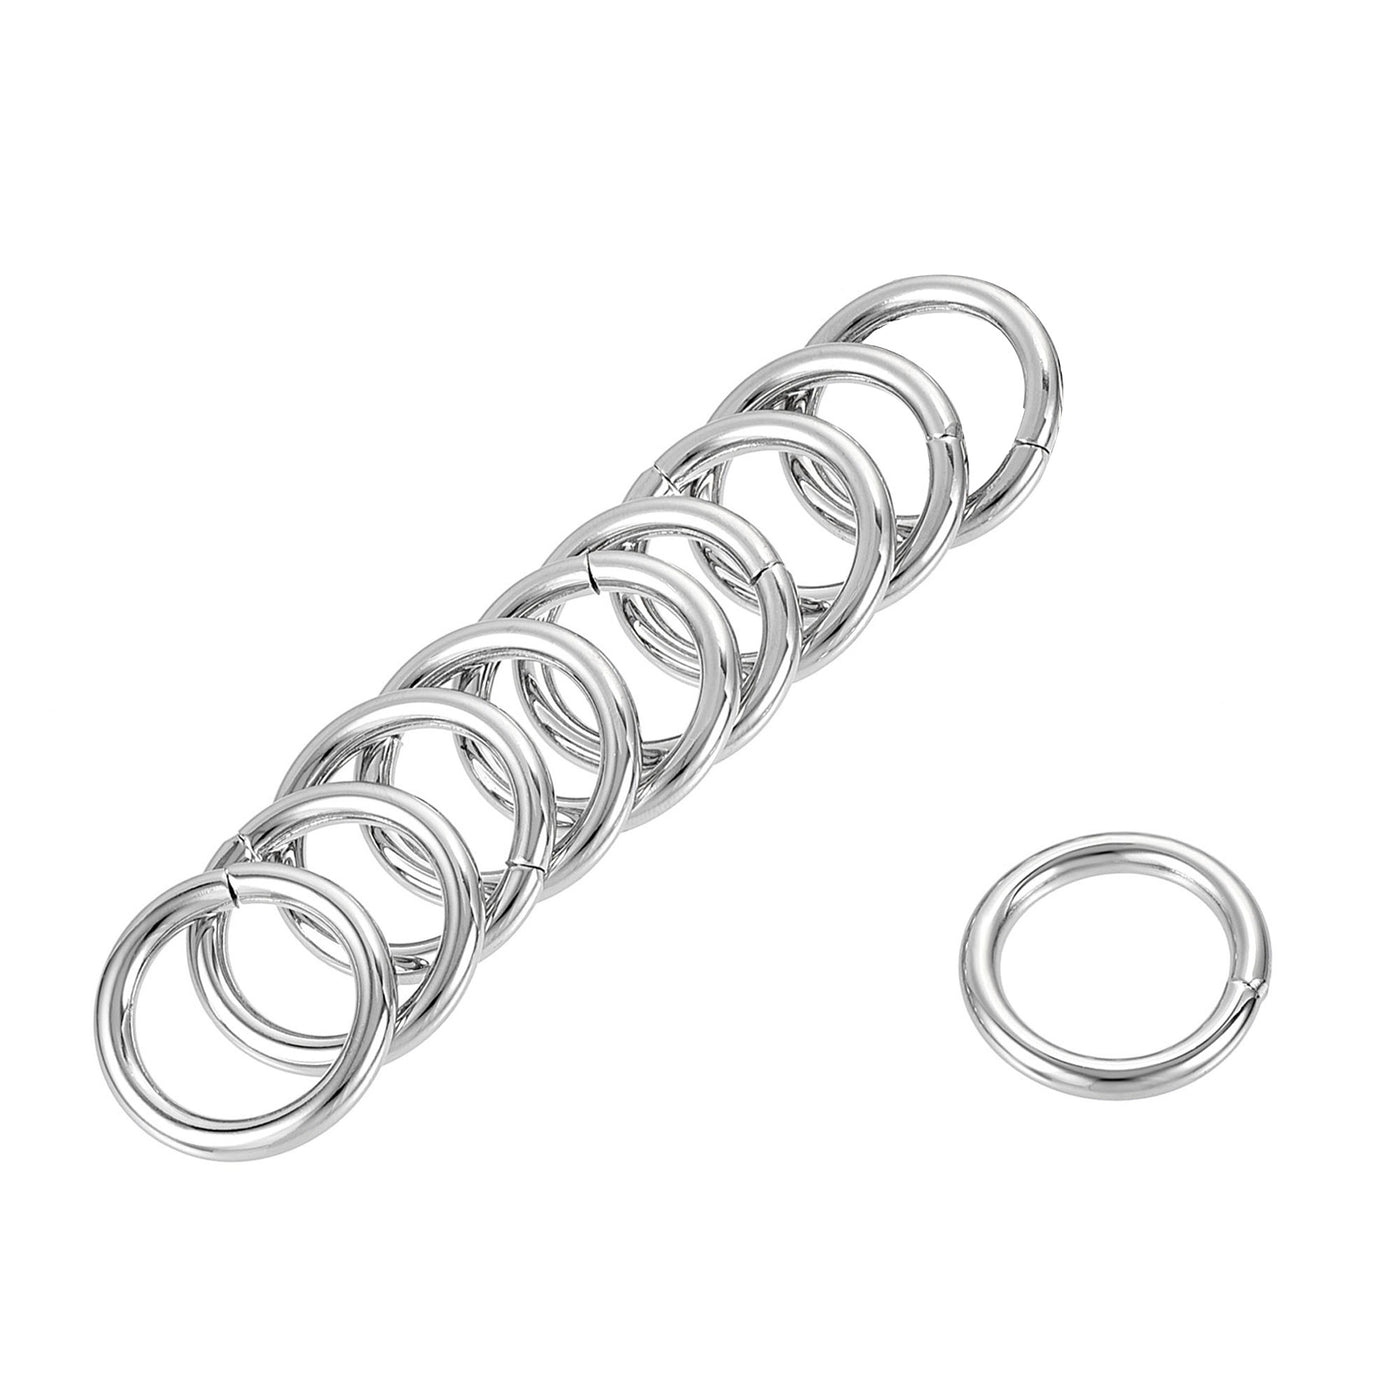 uxcell Uxcell Metal O Ring 20mm(0.79") ID 3.8mm Thickness Non-Welded Rings Silver Tone 15pcs